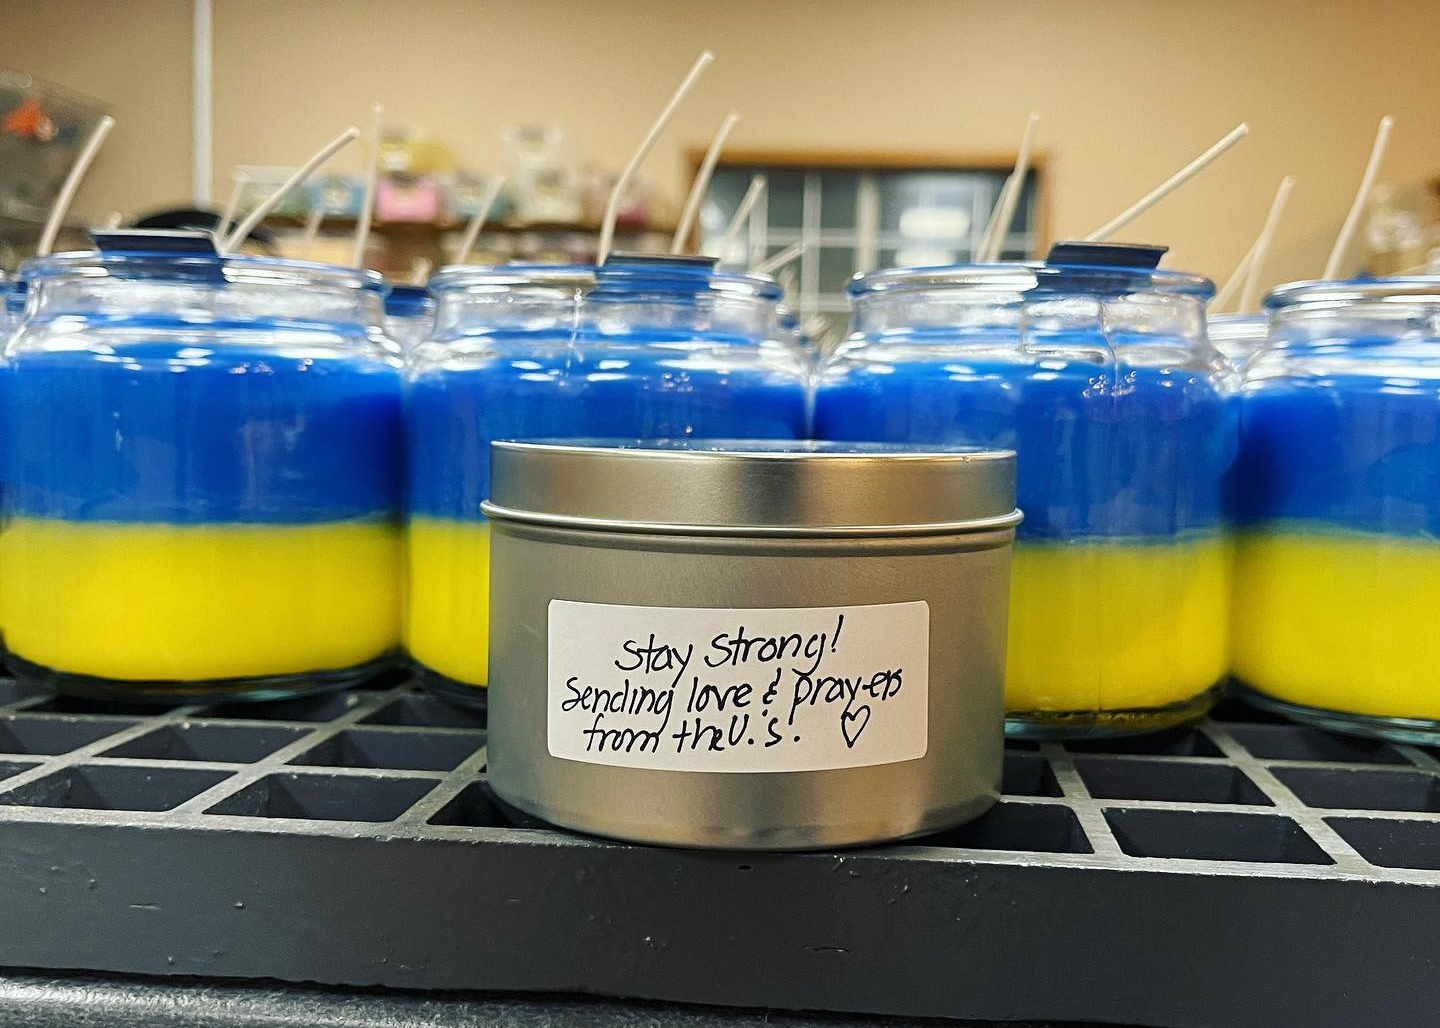 ‘For them, it’s a necessity’: Wisconsin company sells candles to support Ukrainians amid power outages